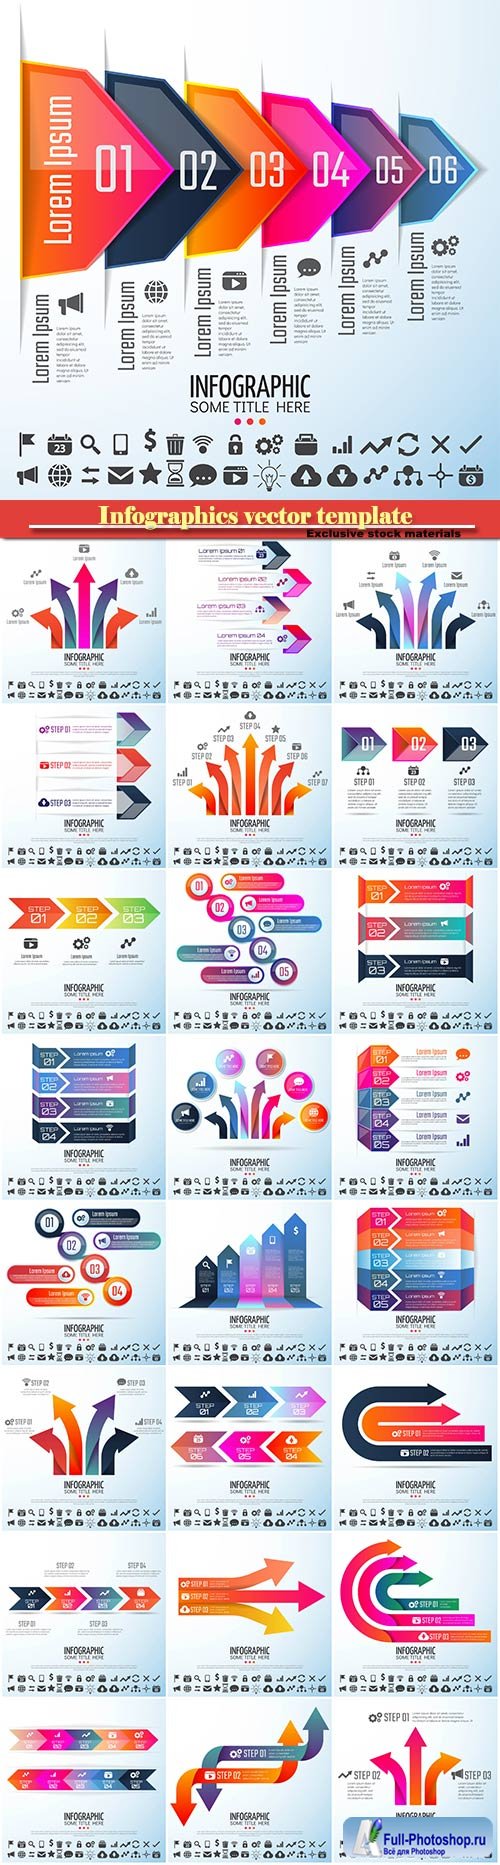 Infographics vector template for business presentations or information banner # 8